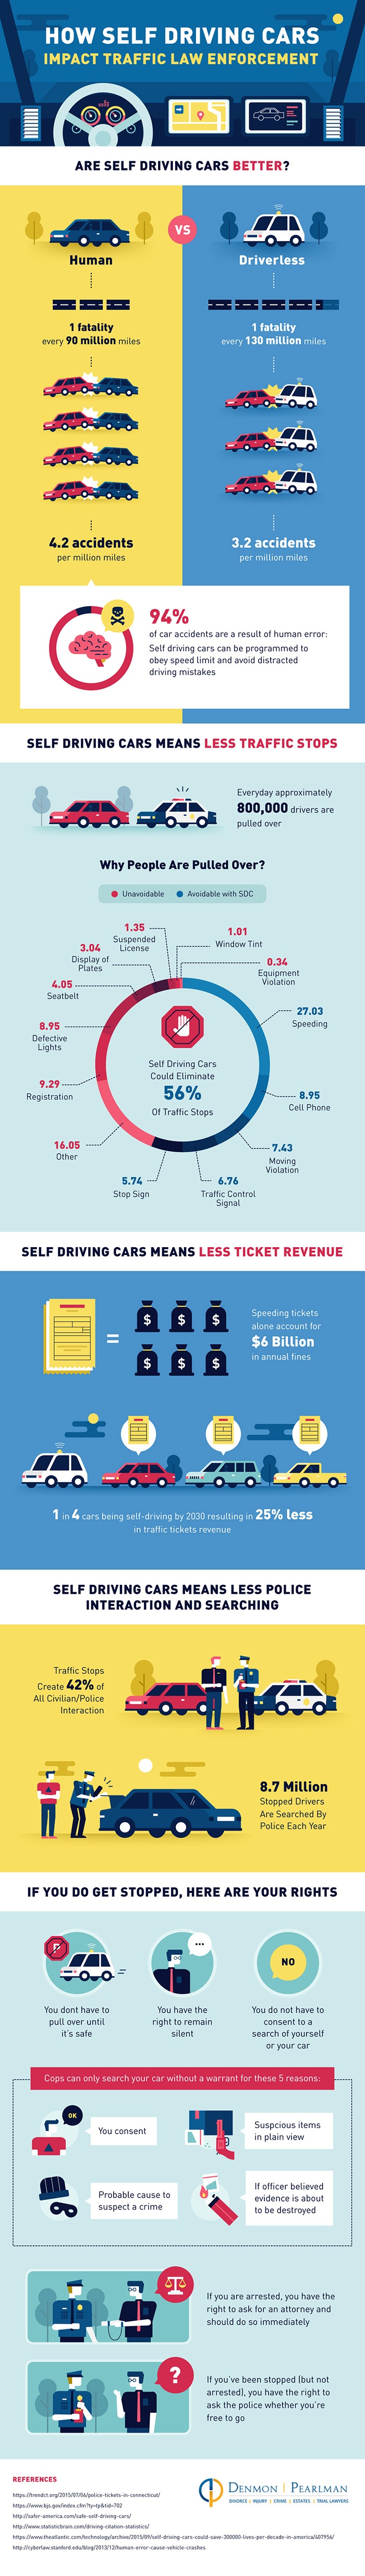 Self-Driving-Cars-Infographic700